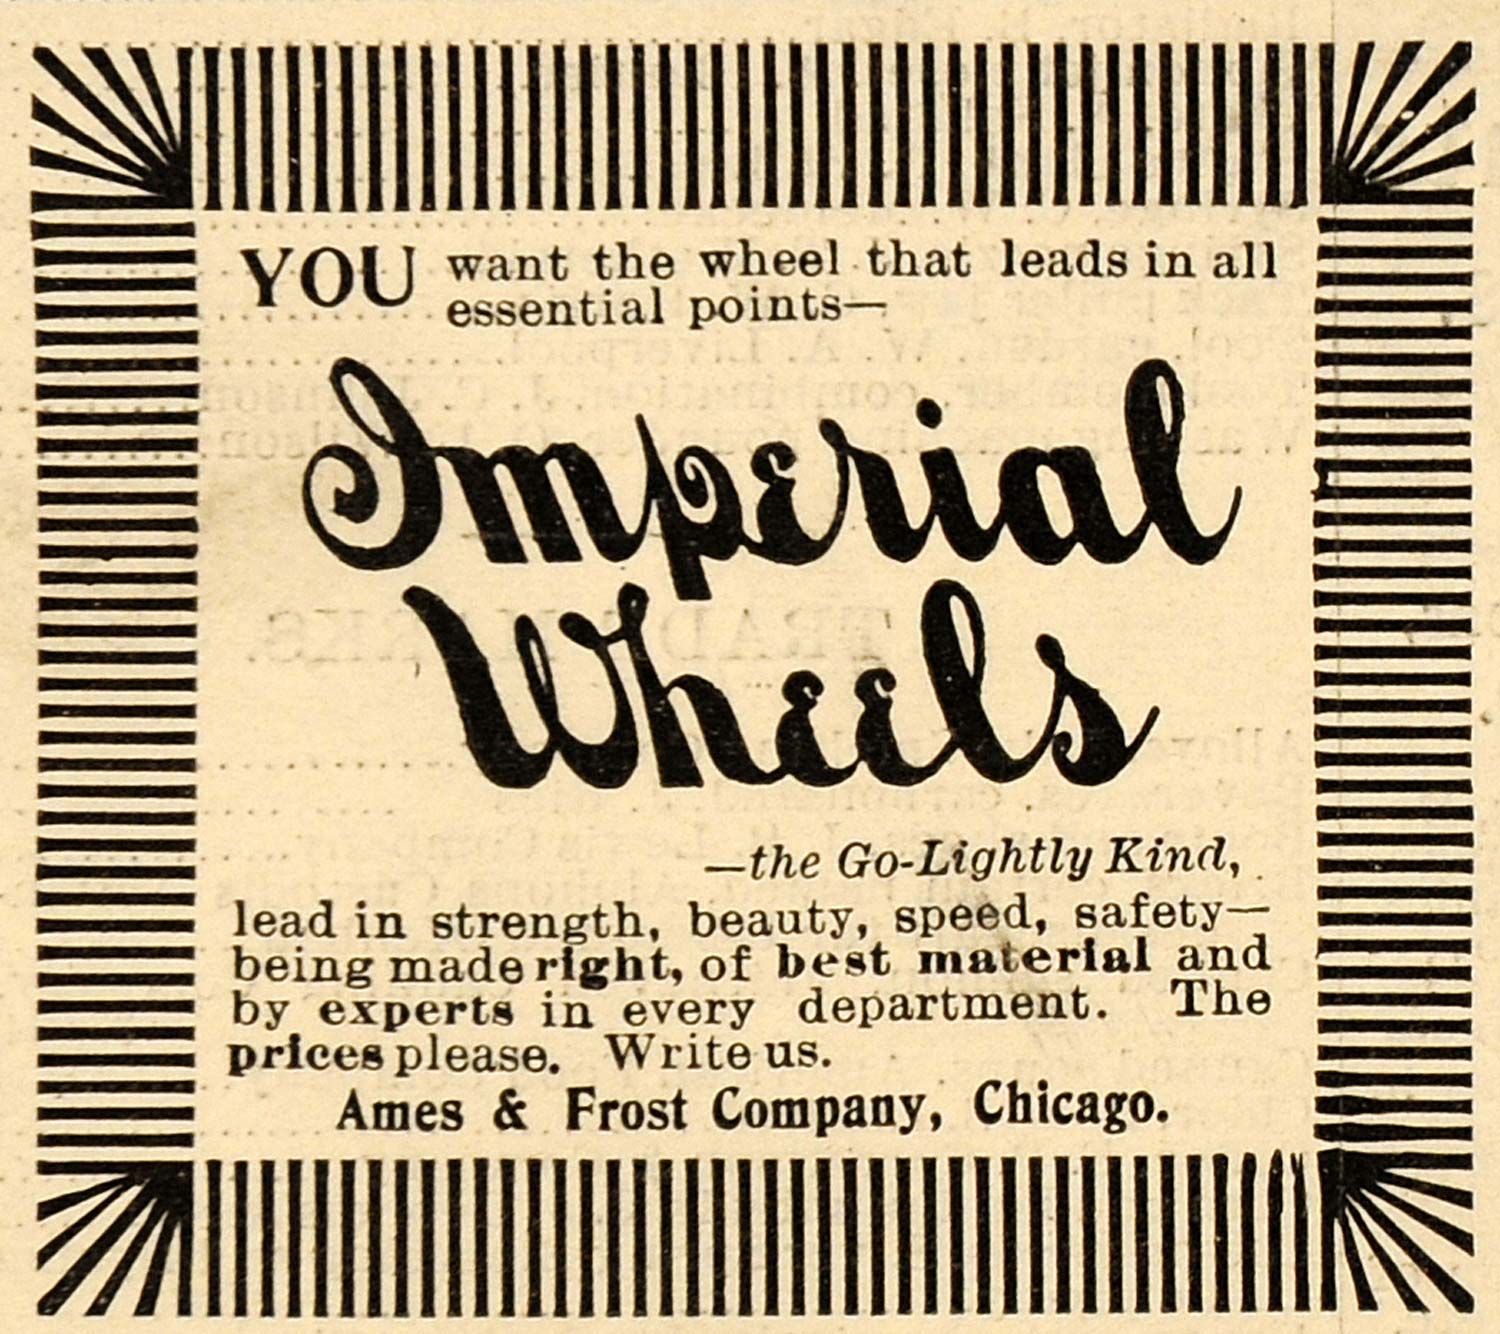 1899 Ad Ames & Frost Co. Imperial Wheels Chicago IL - ORIGINAL ADVERTISING SCA2